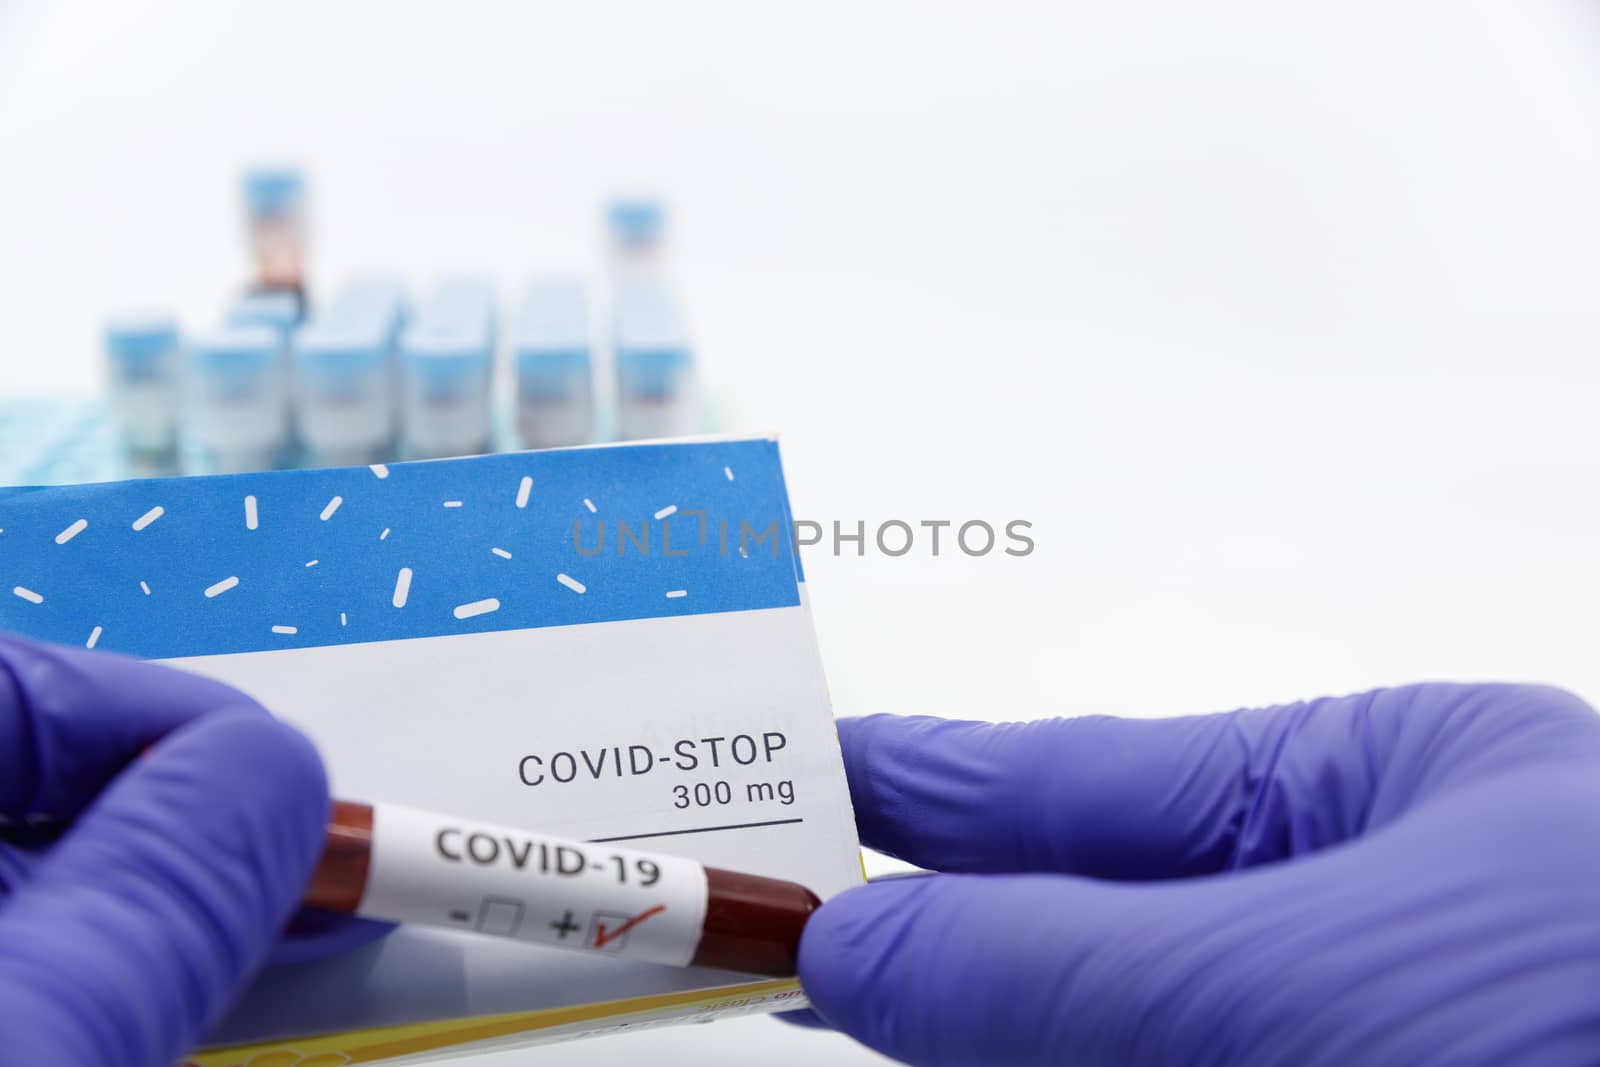 Doctor showing box of medicine with positive covid-19 test.Concept of covid stop medicine with blood tests tubes on the background.Cure for coronavirus,COVID-19 treatment.